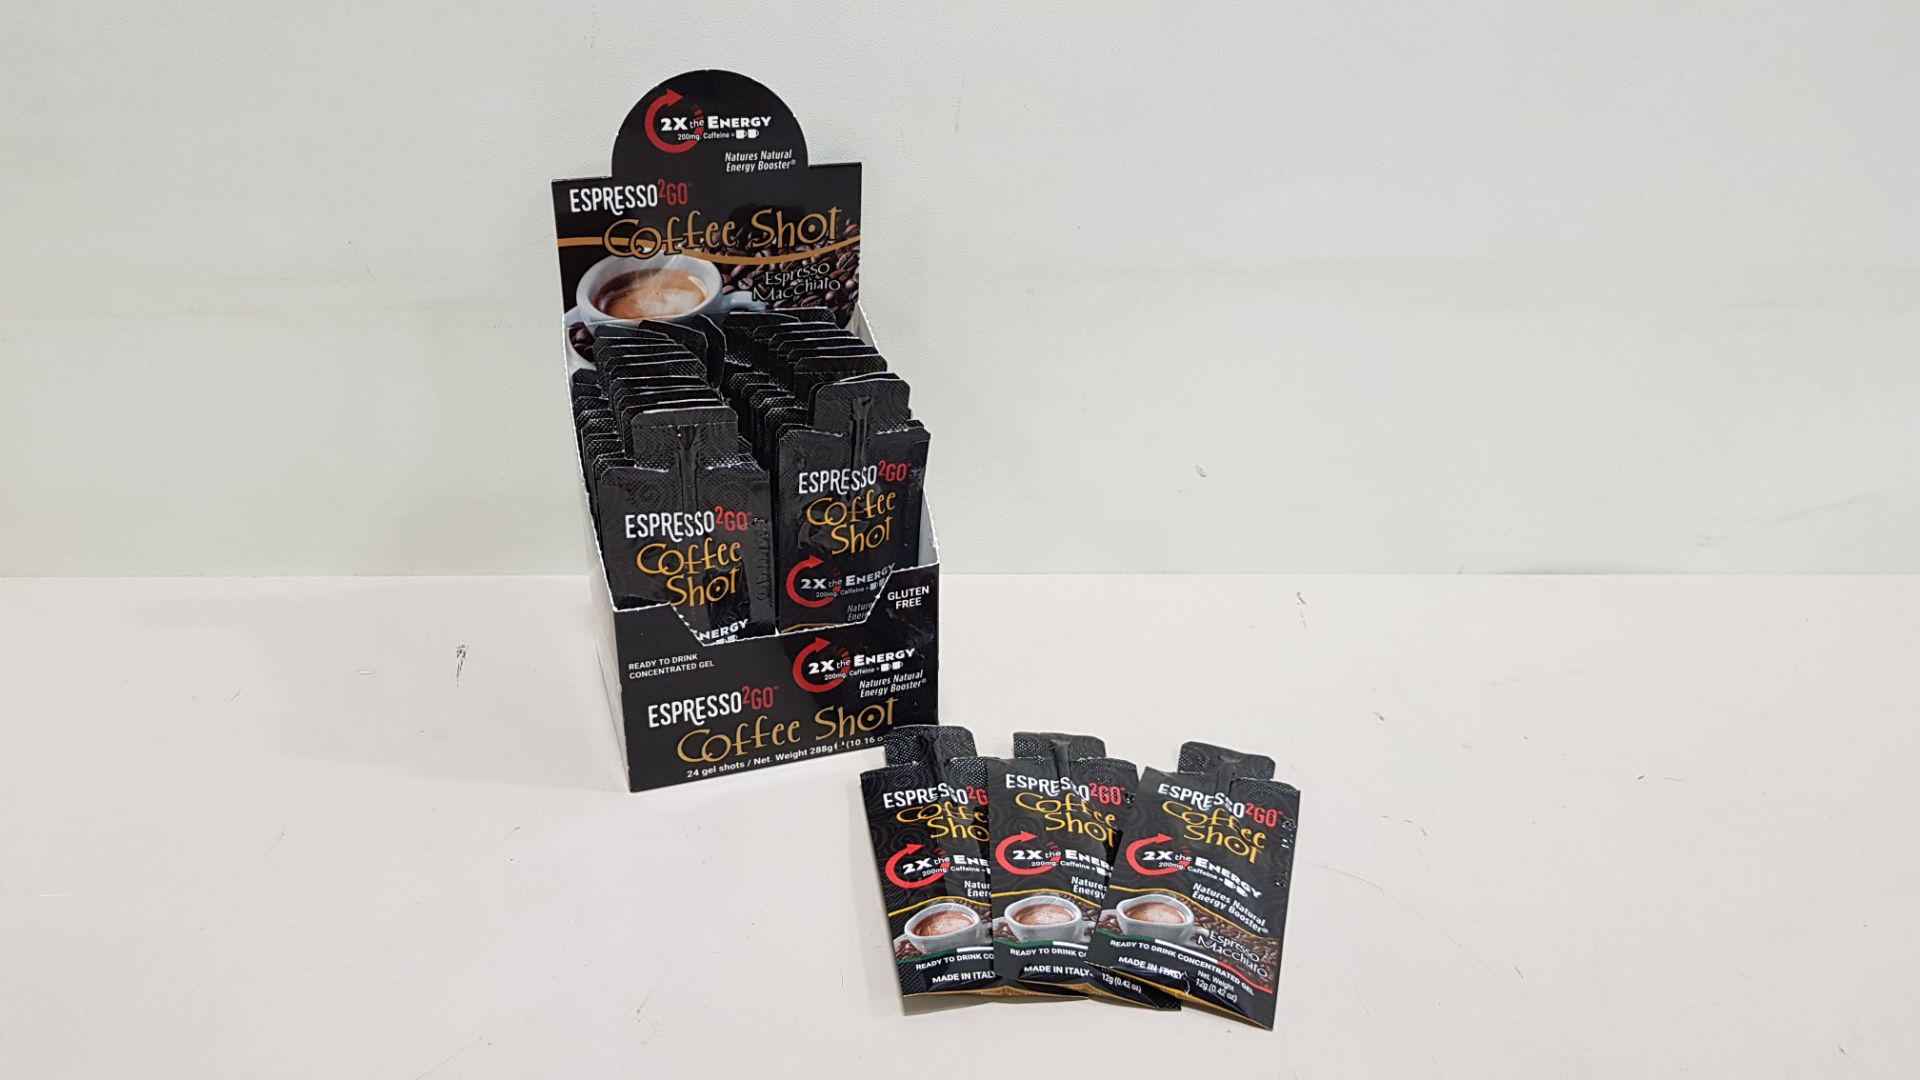 576 X BRAND NEW EXPRESSO TO GO MACCHIATO COFFEE SHOTS 12G IN COUNTER DISPLAY BOXES OF 24 PIECES